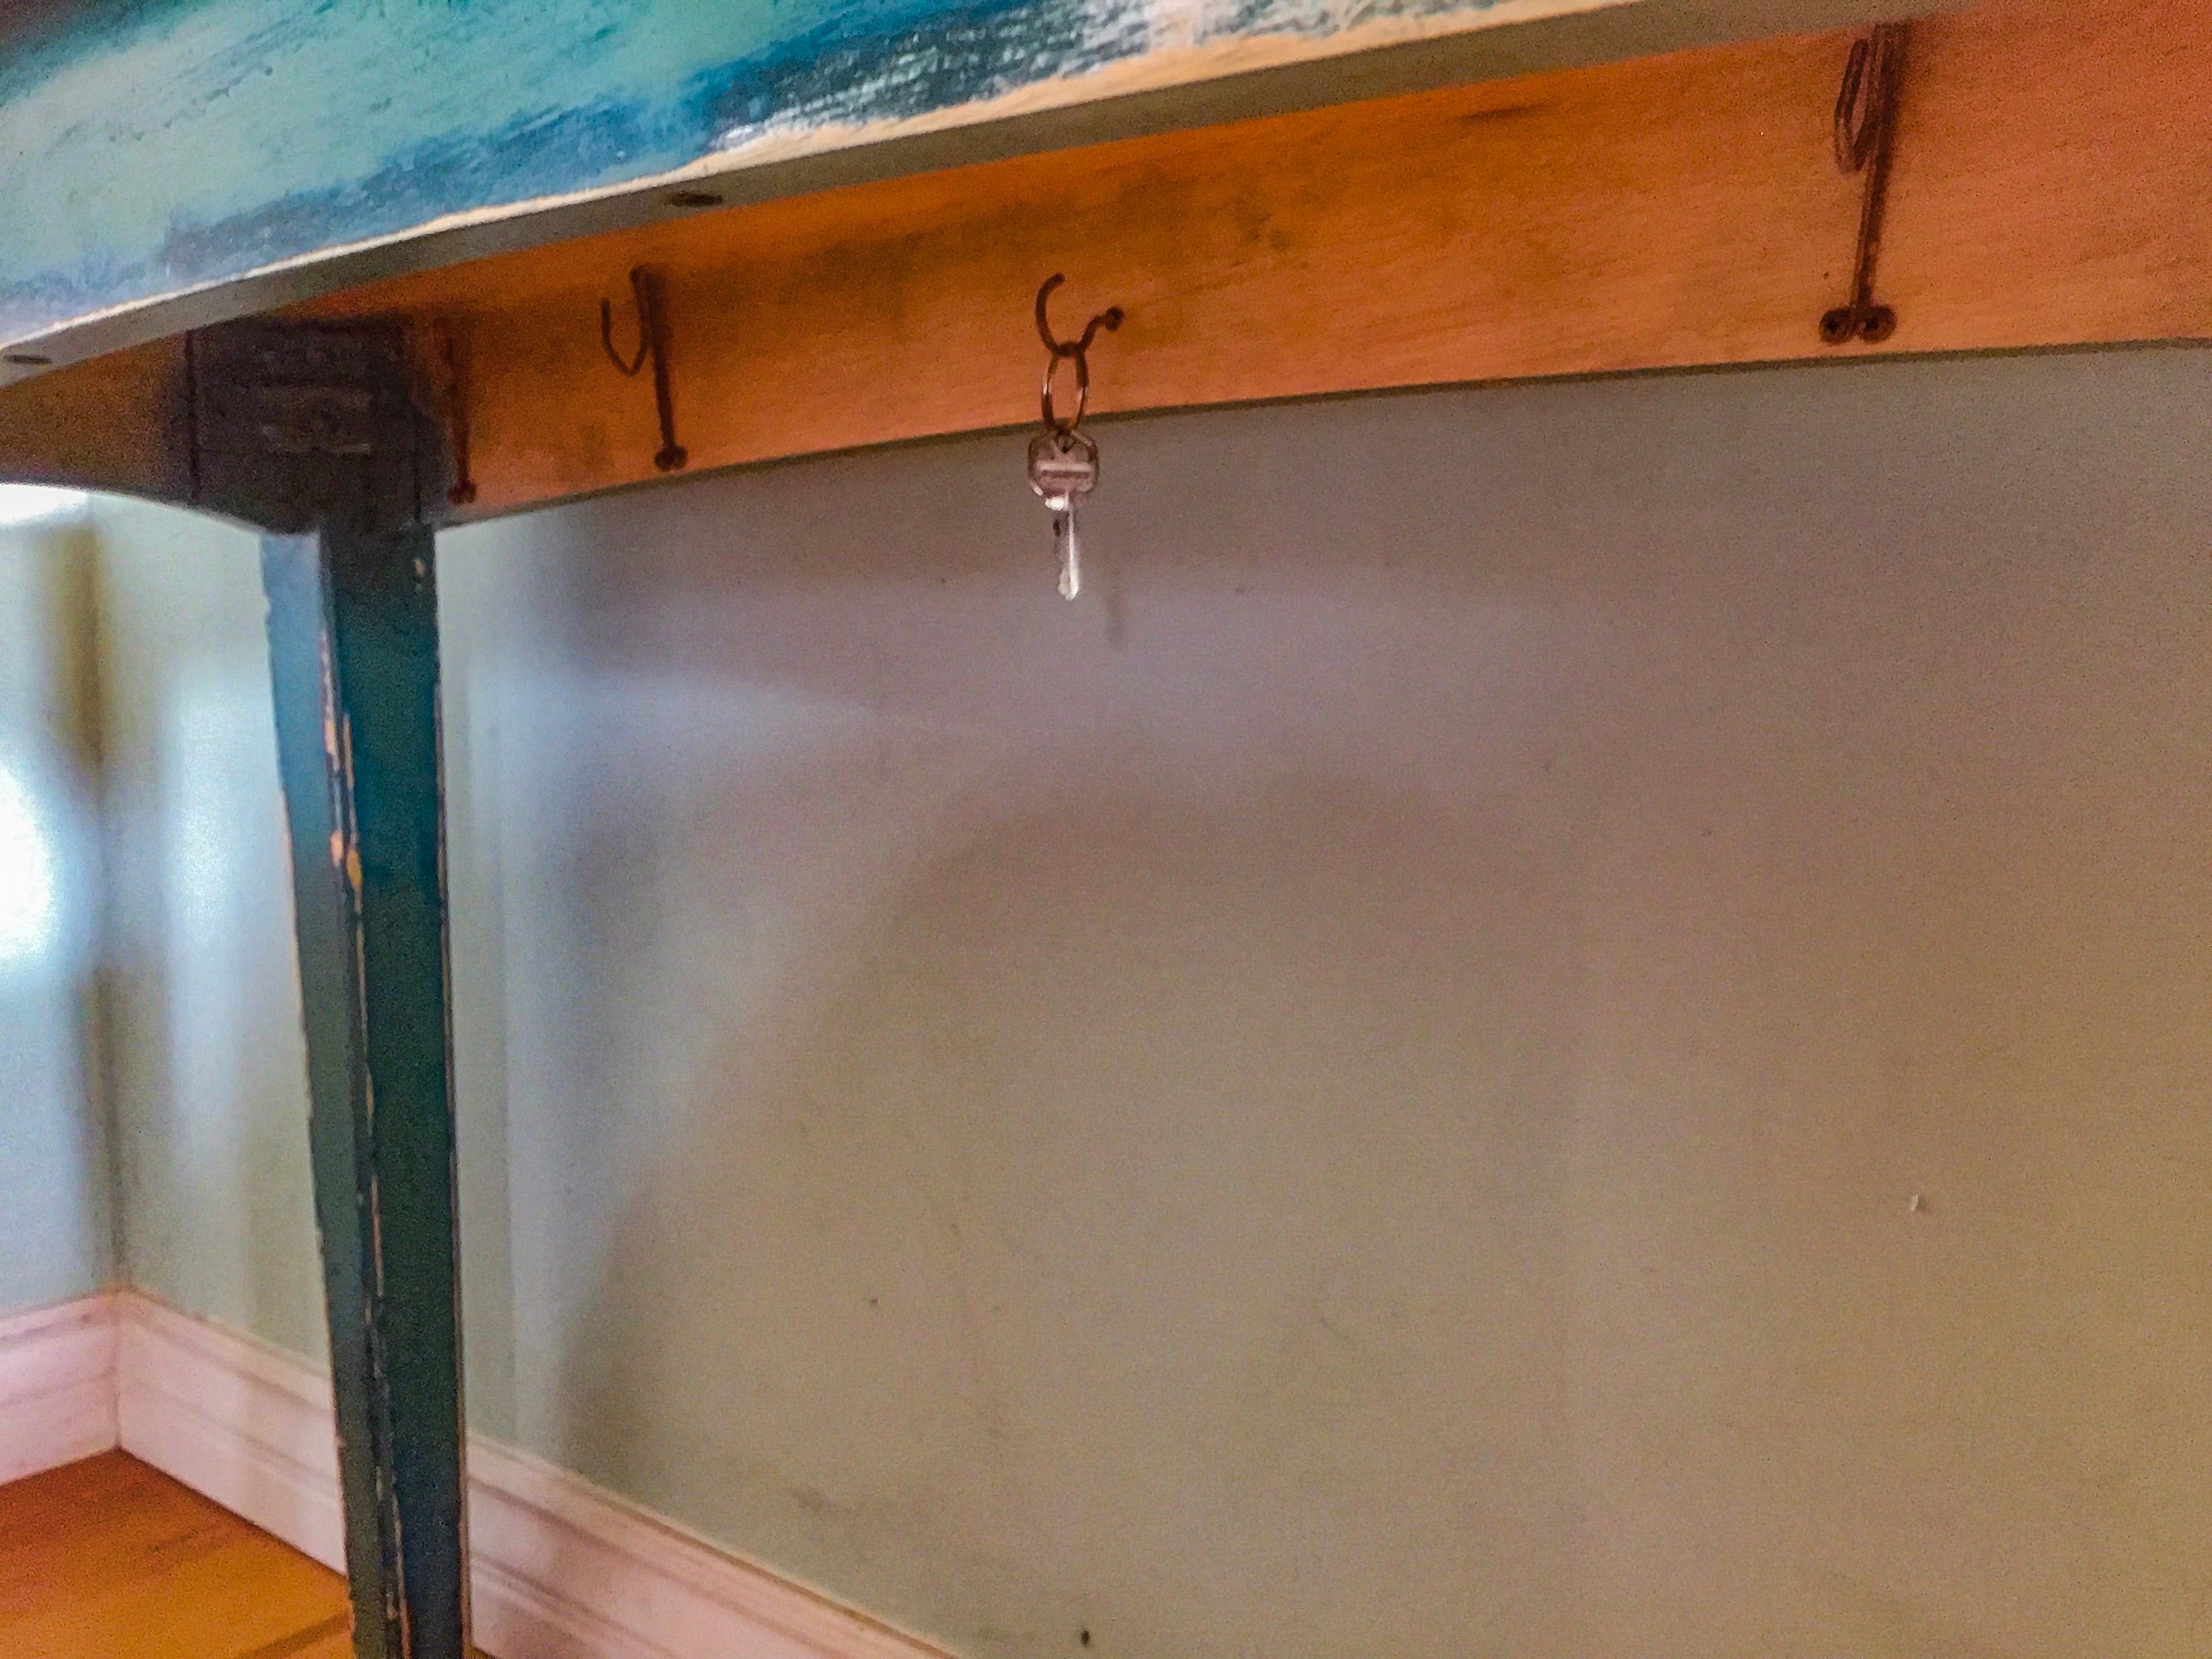 Boho Style Entry Table with key hooks ~ in weathered blue & green hues